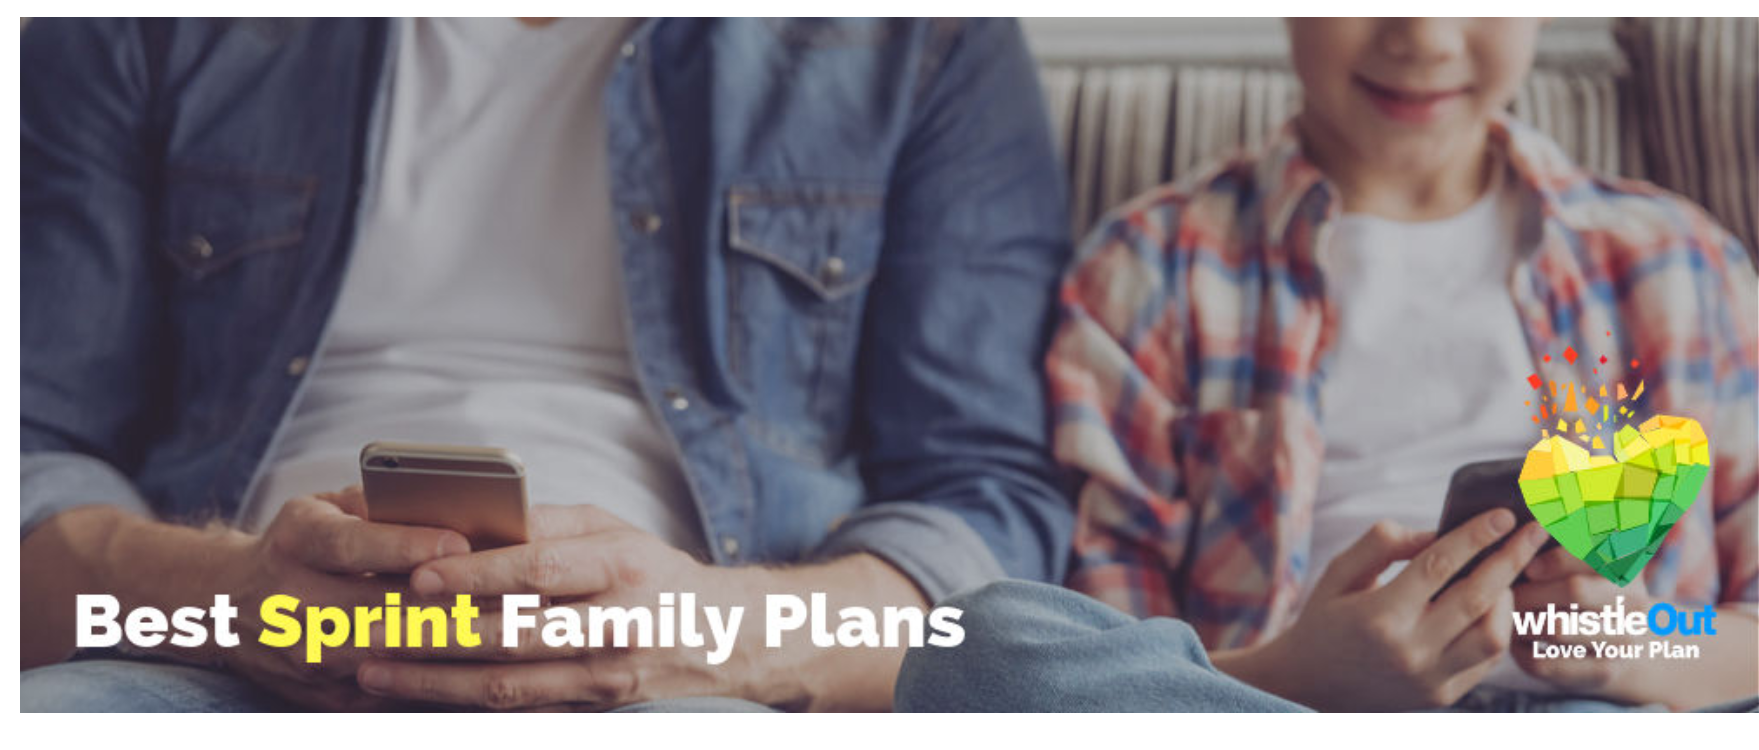 Upgrade To The Sprint Family Plan